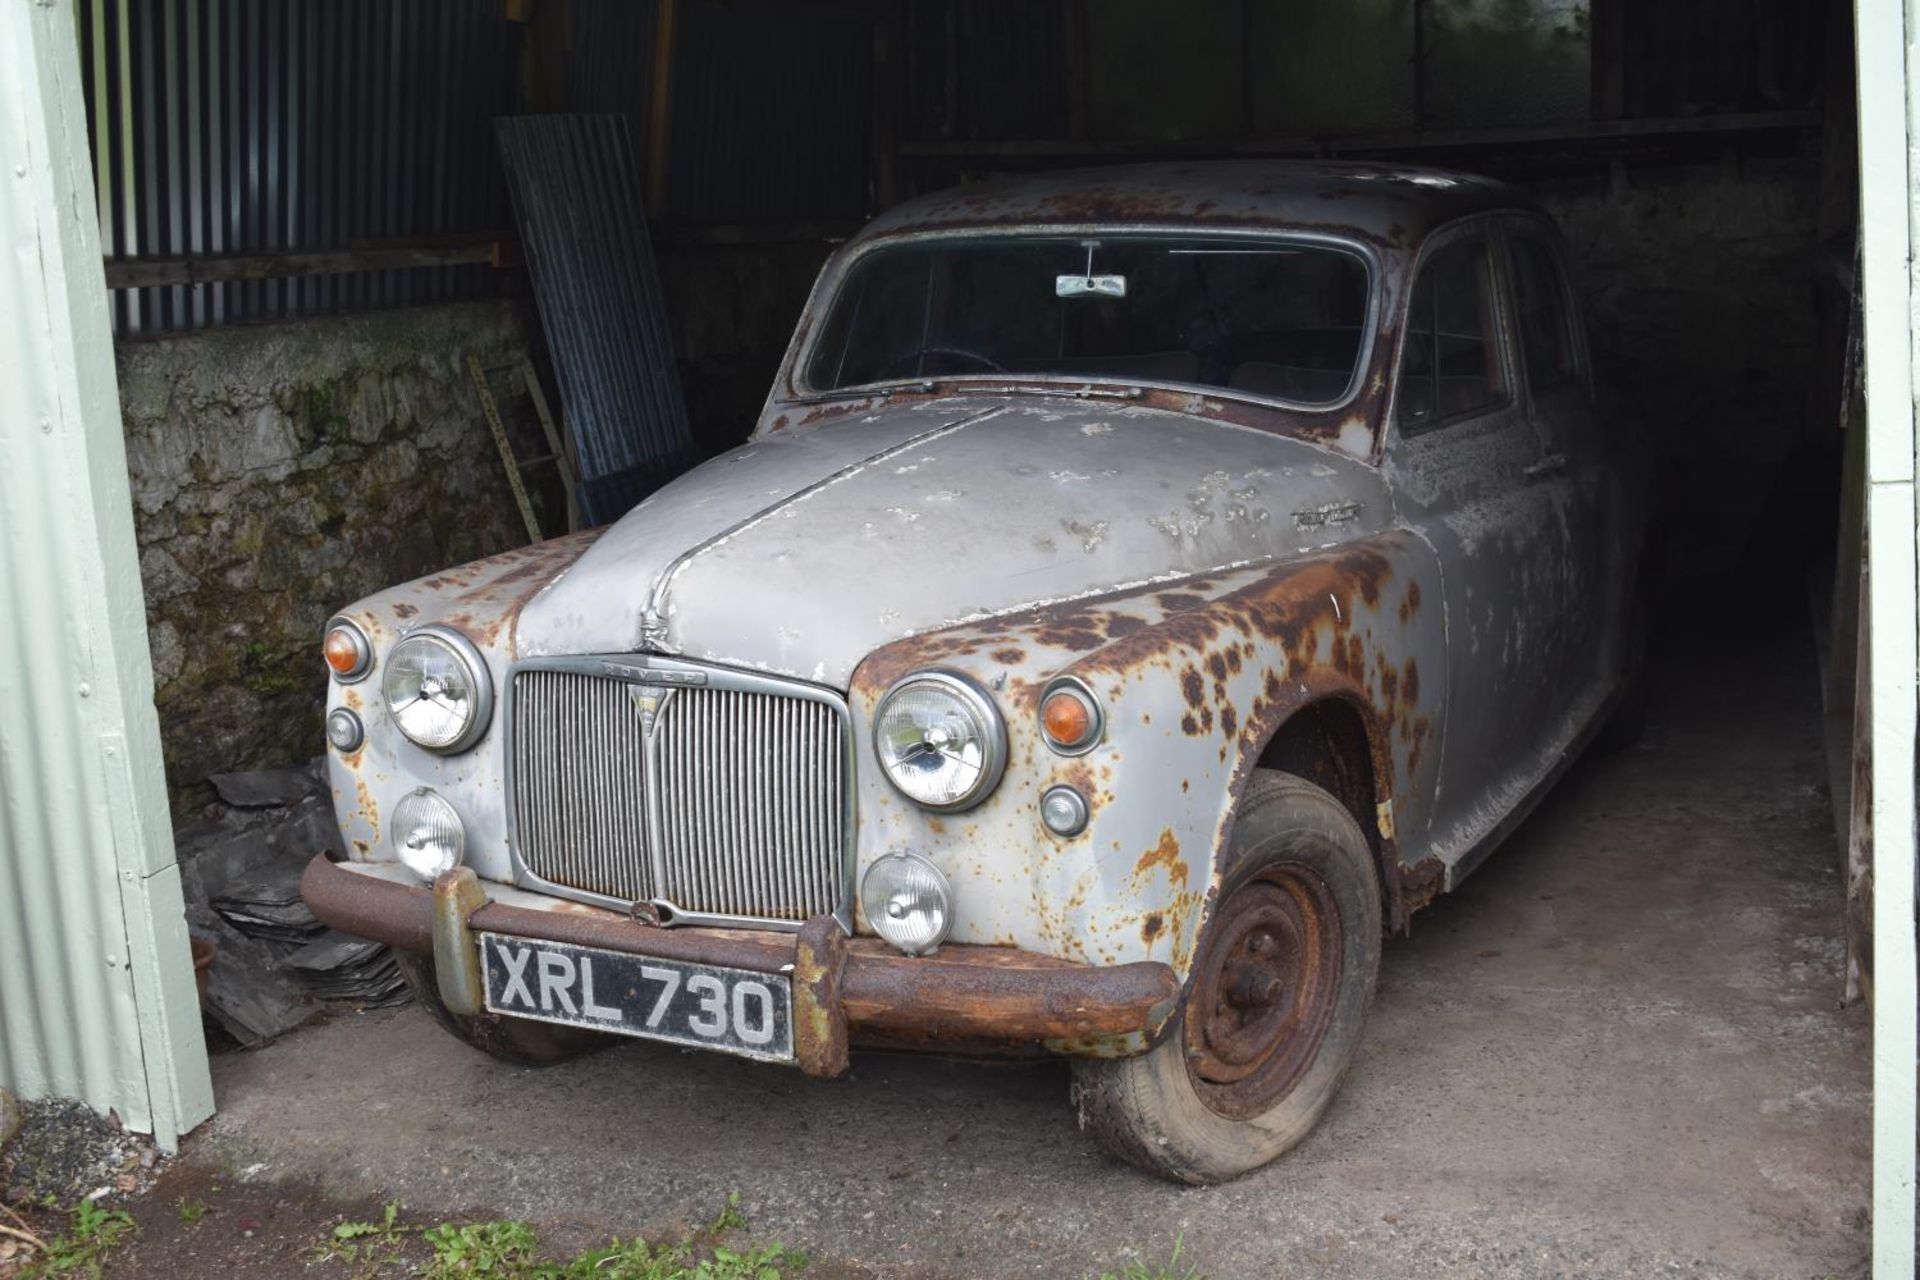 A 1957 Rover 105R project, registration number XRL 130, grey. The Rover 105R is one of the rarer